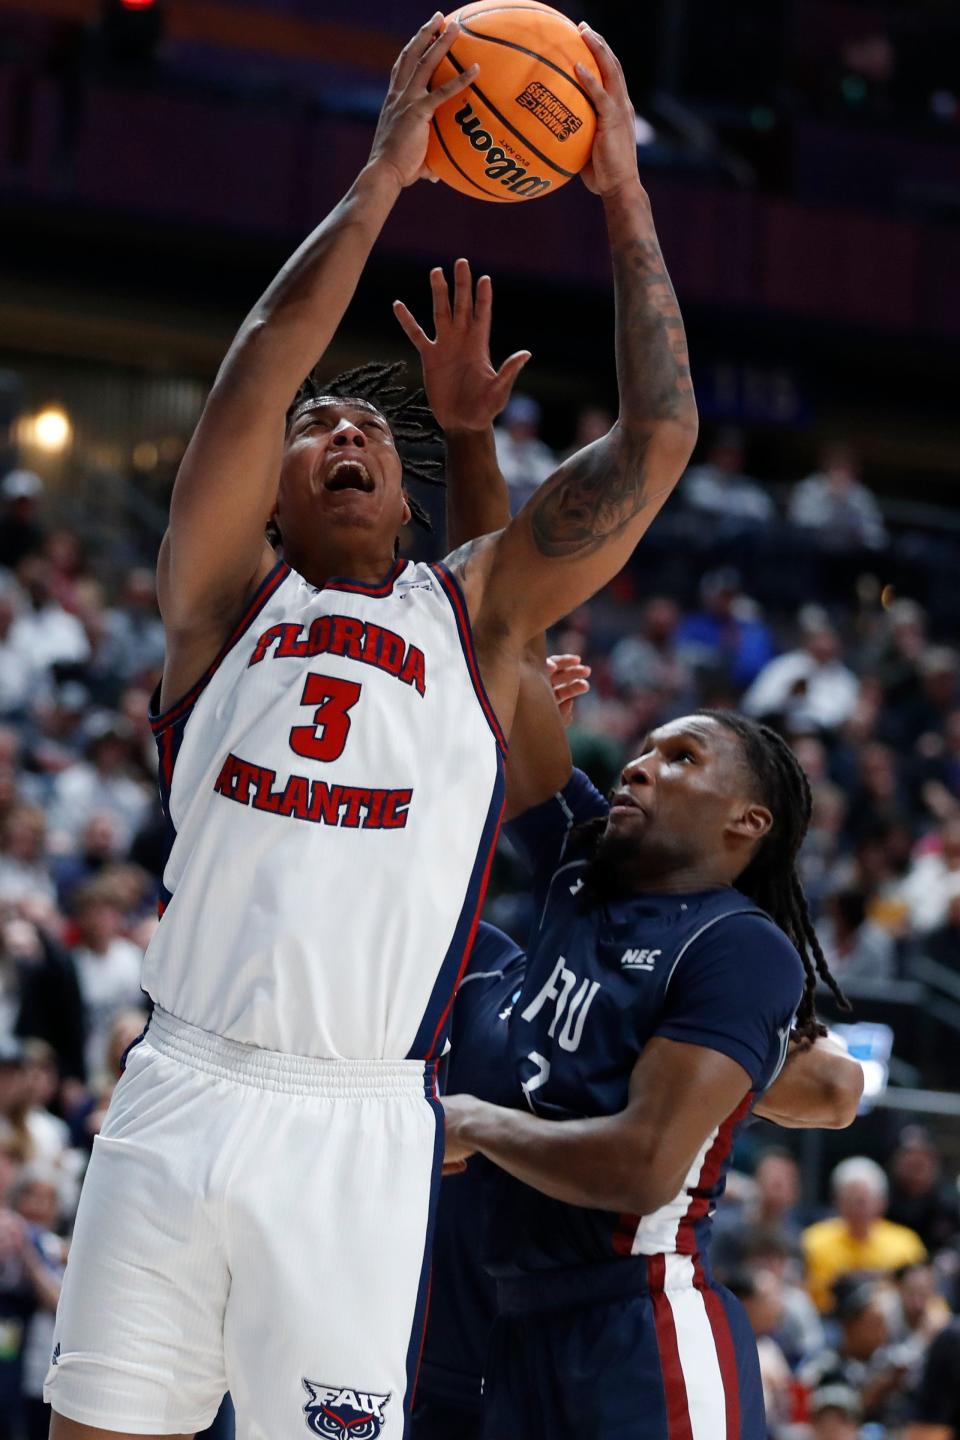 Mar 19, 2023; Columbus, OH, USA; Florida Atlantic Owls forward Giancarlo Rosado (3) jumps for the basket defended by Fairleigh Dickinson Knights guard Heru Bligen (3) in the first half at Nationwide Arena. Mandatory Credit: Joseph Maiorana-USA TODAY Sports